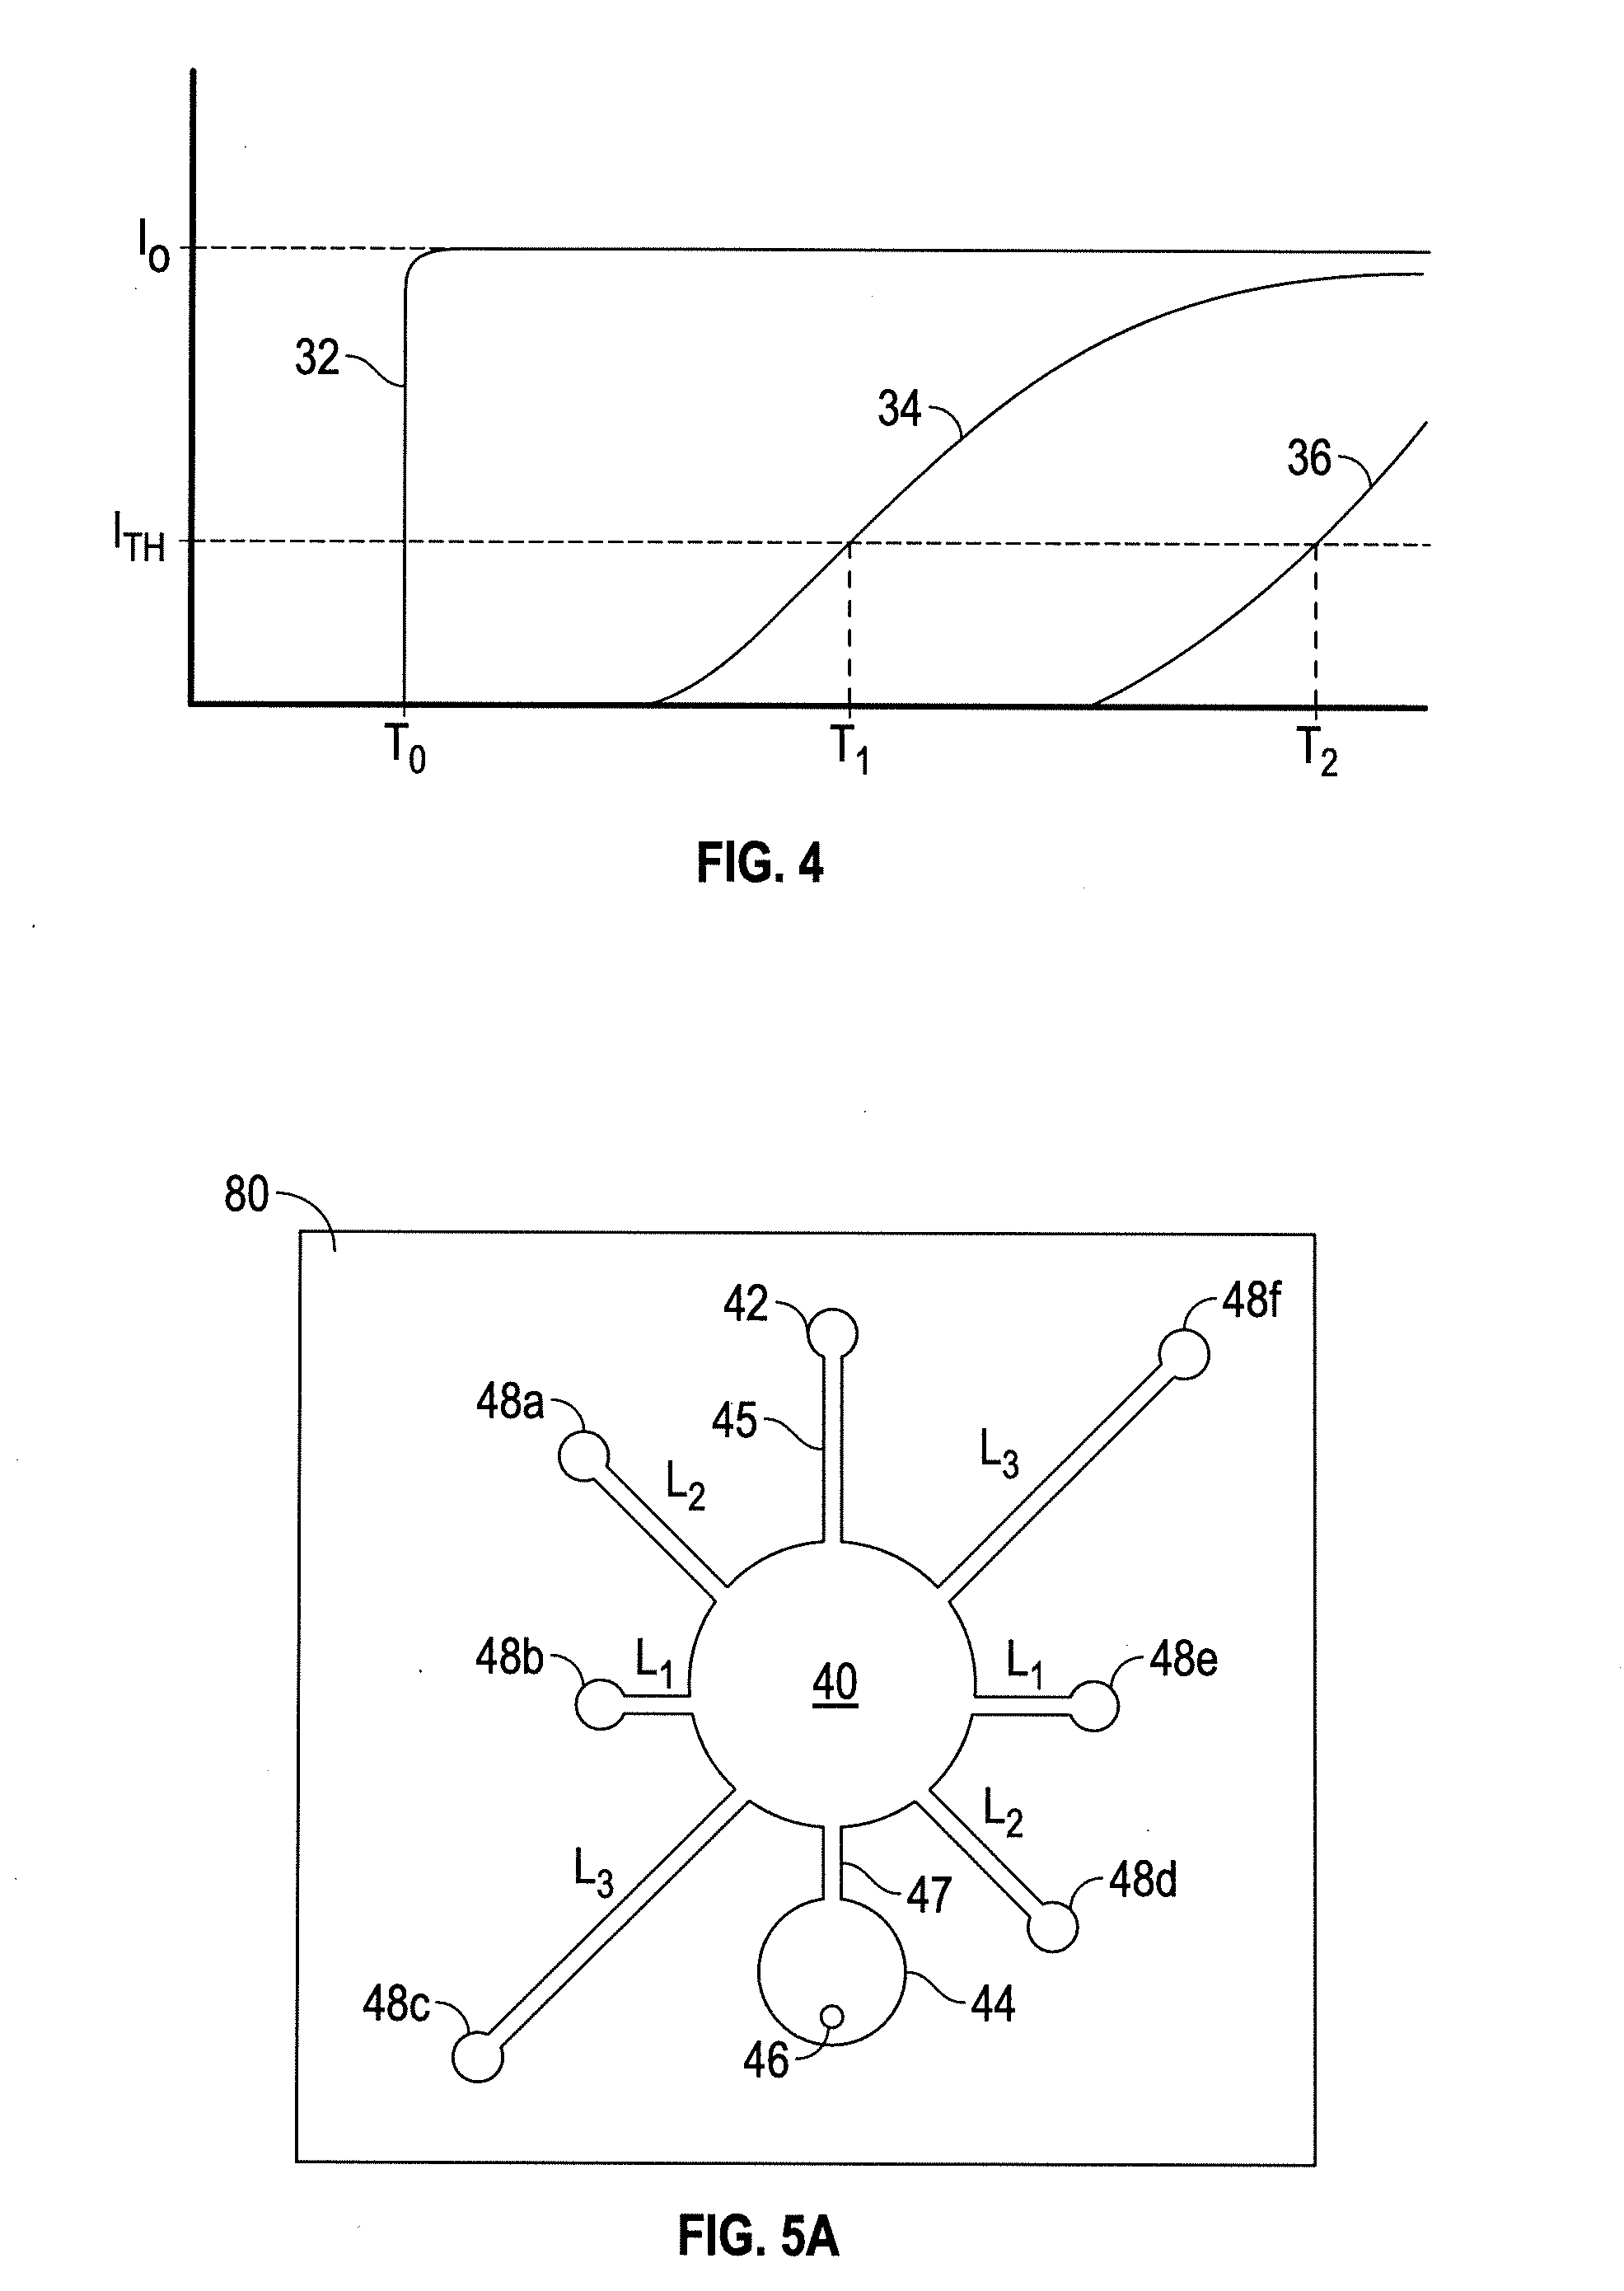 Light scattering sperm assesment device and method